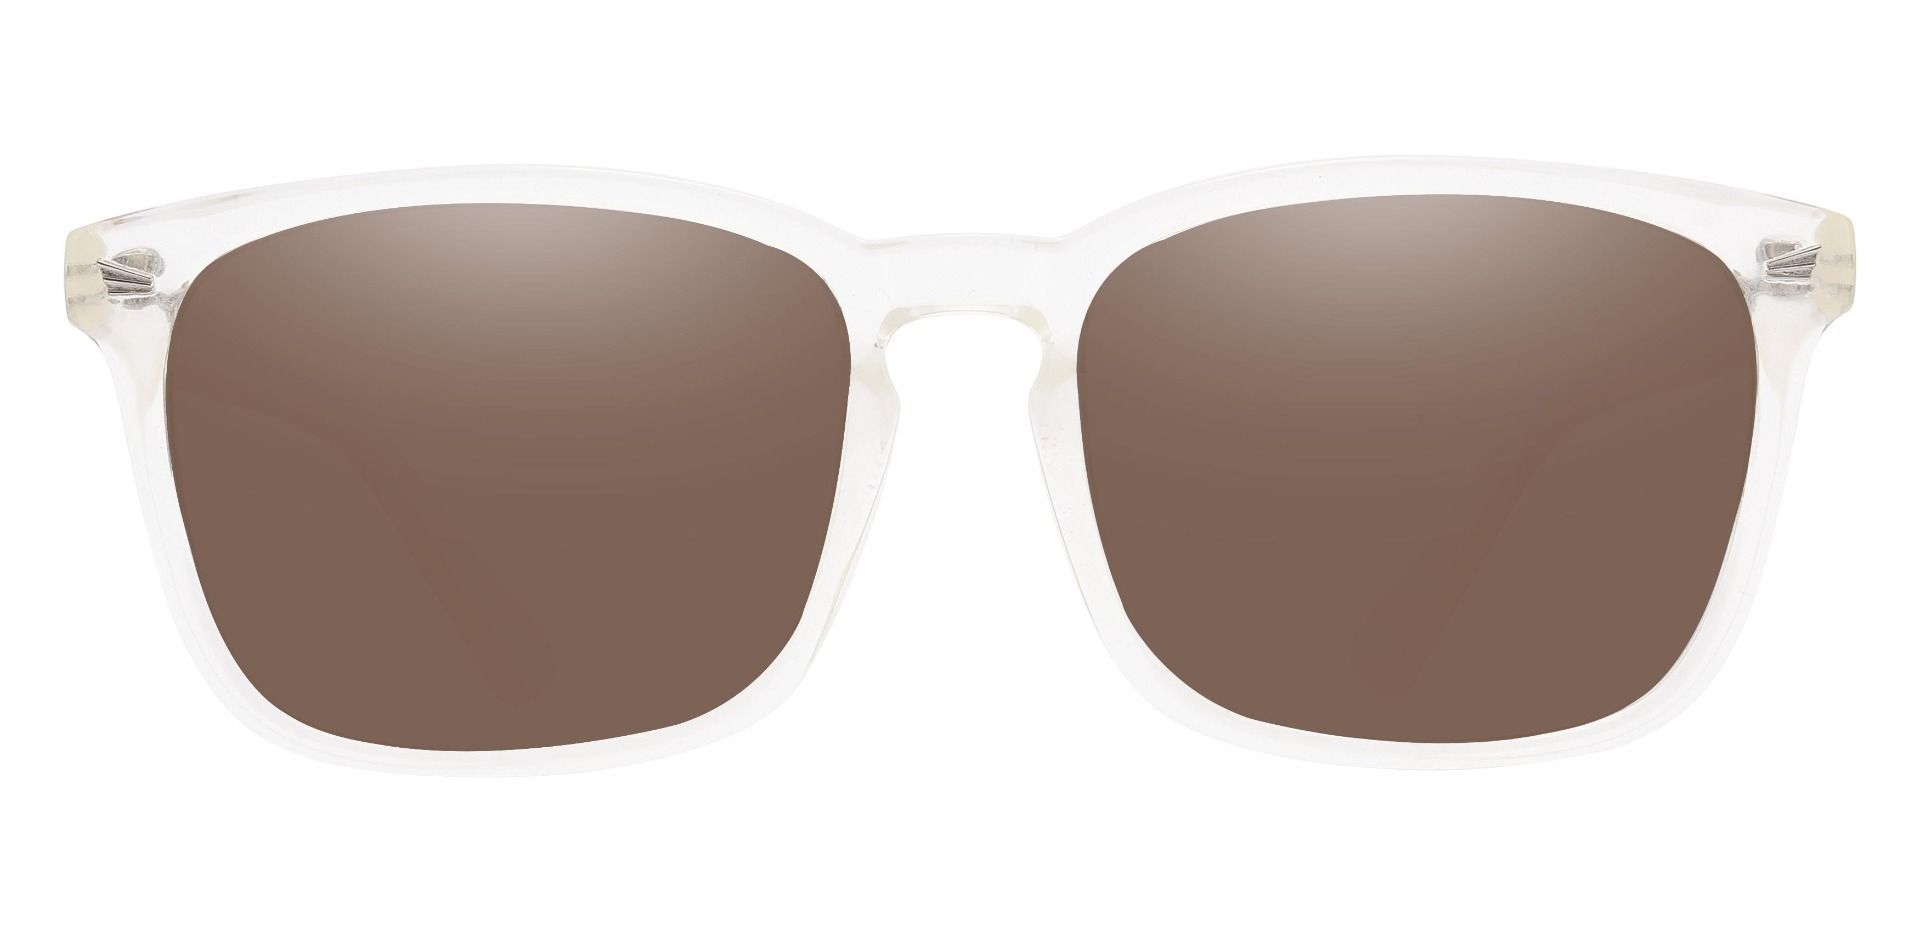 Enderlin Square Lined Bifocal Sunglasses - Clear Frame With Brown Lenses